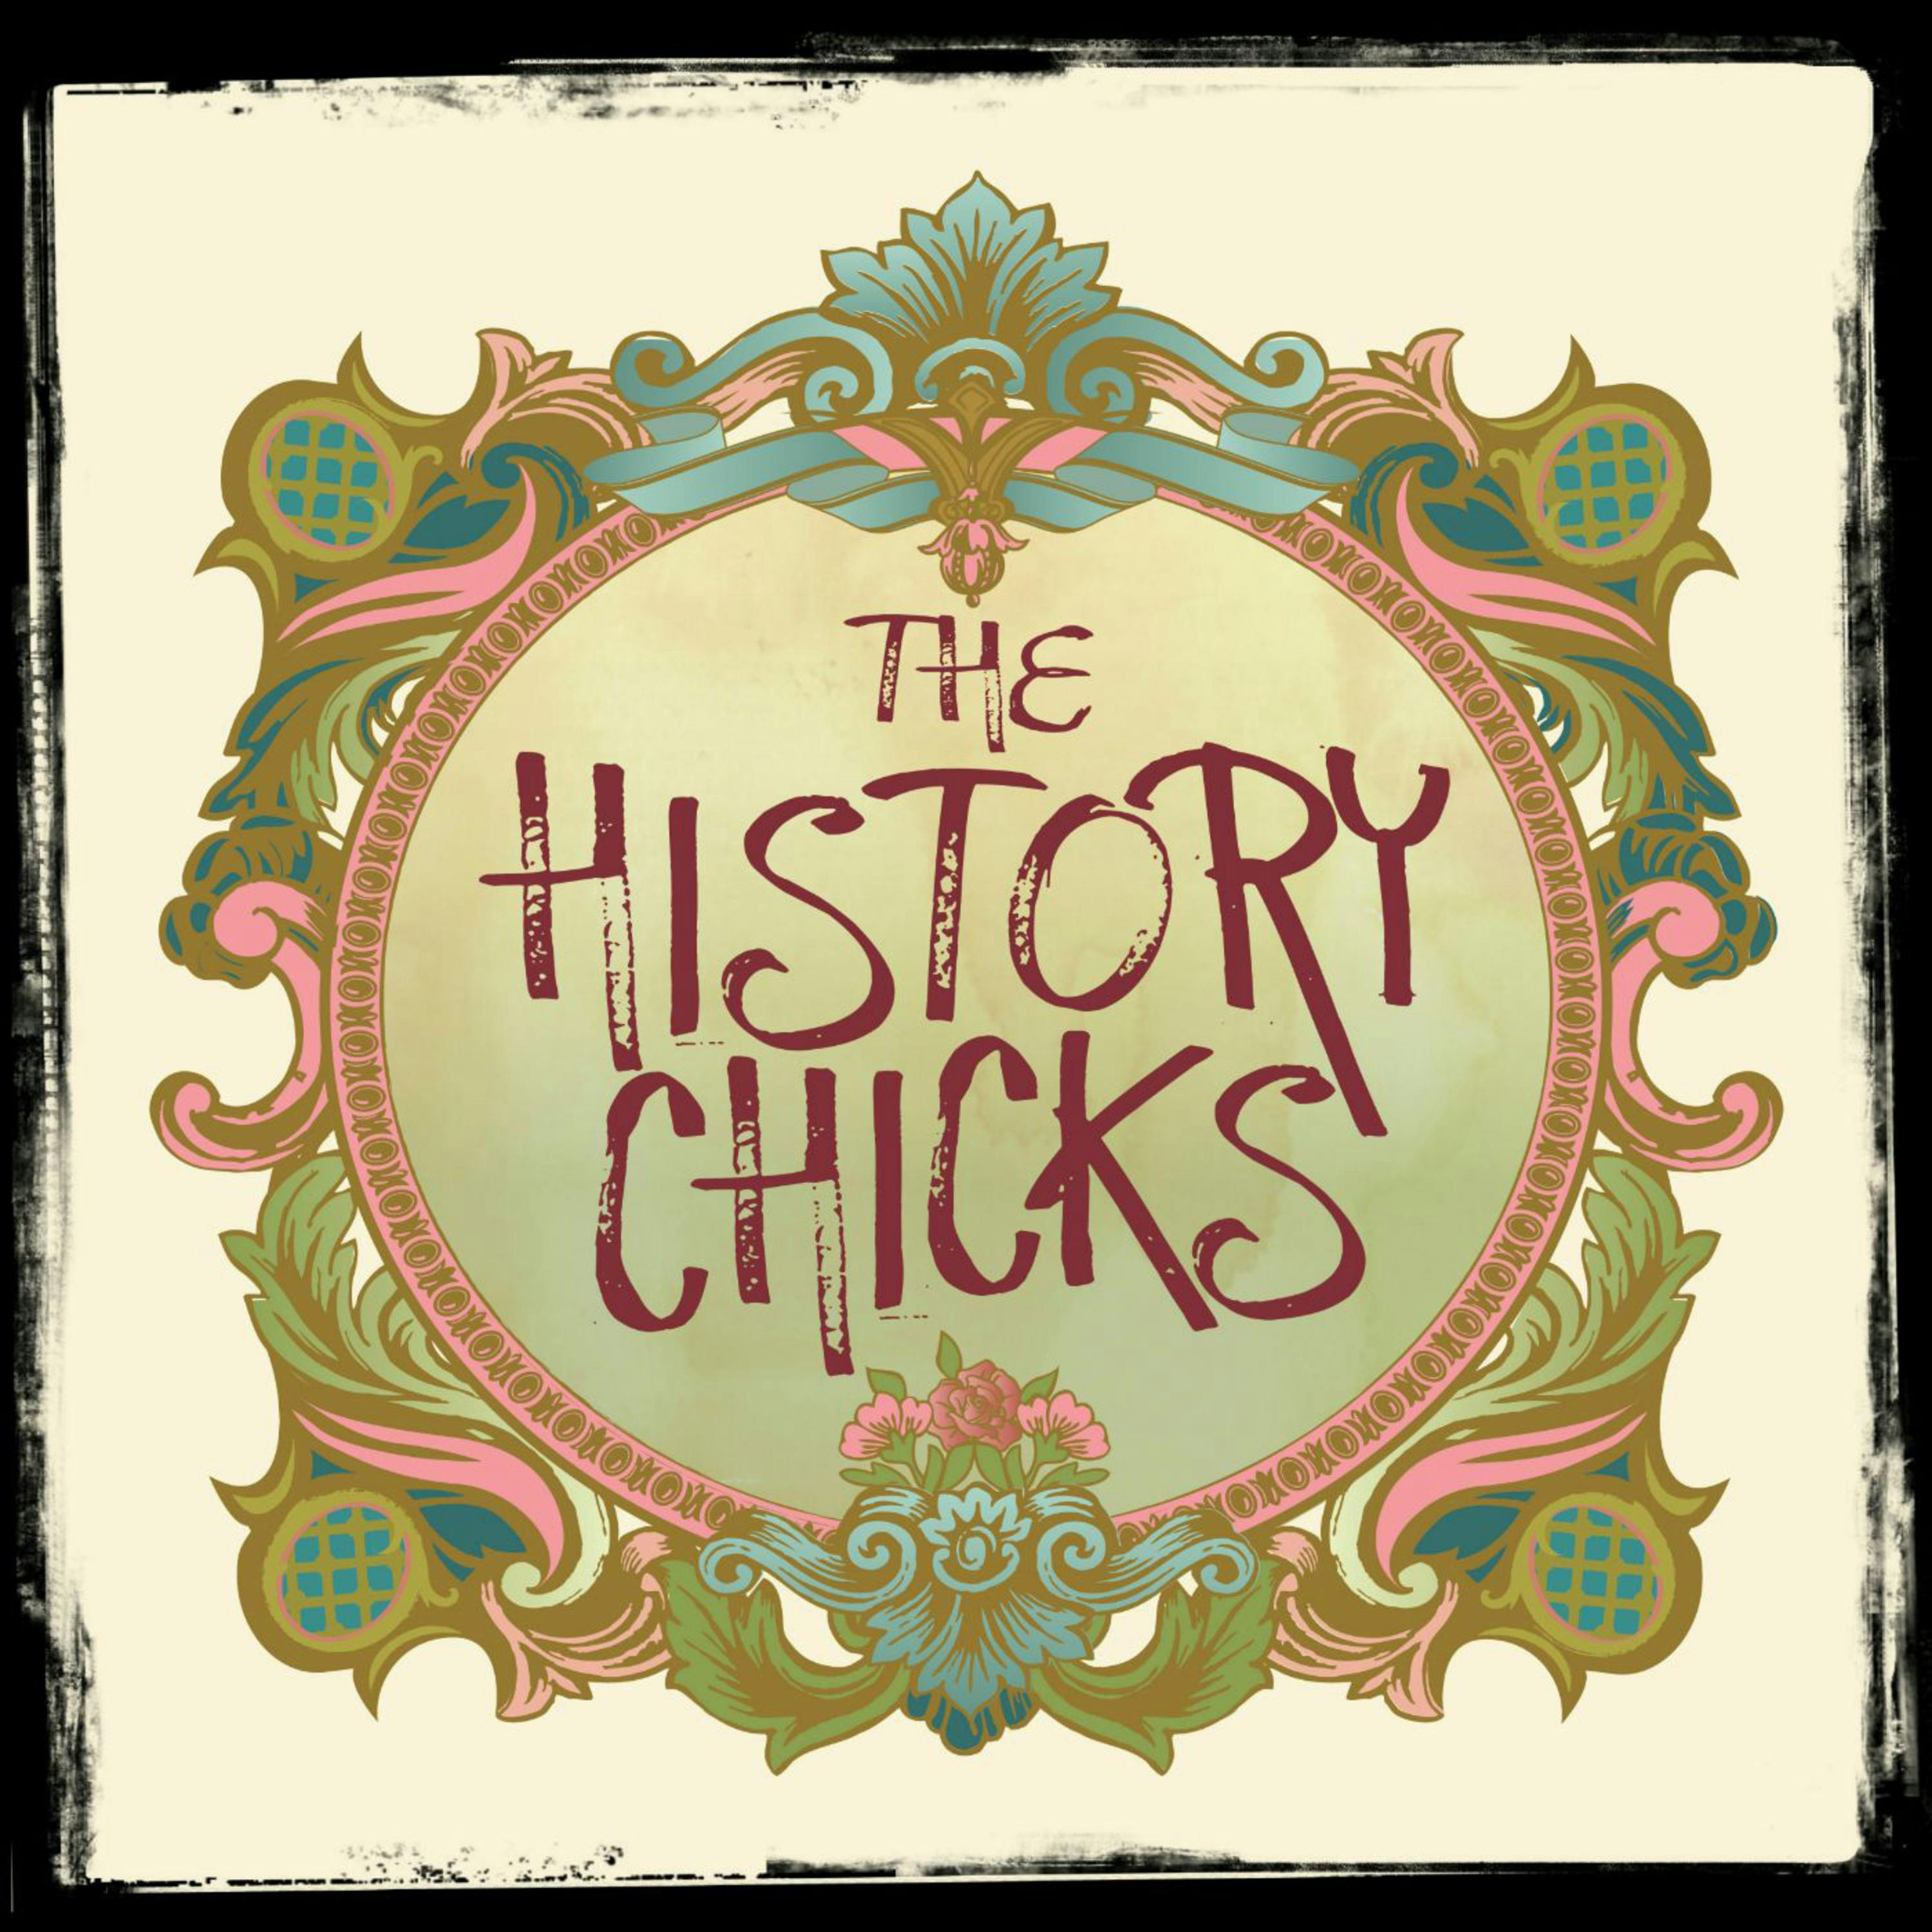 The History Chicks:The History Chicks | QCODE